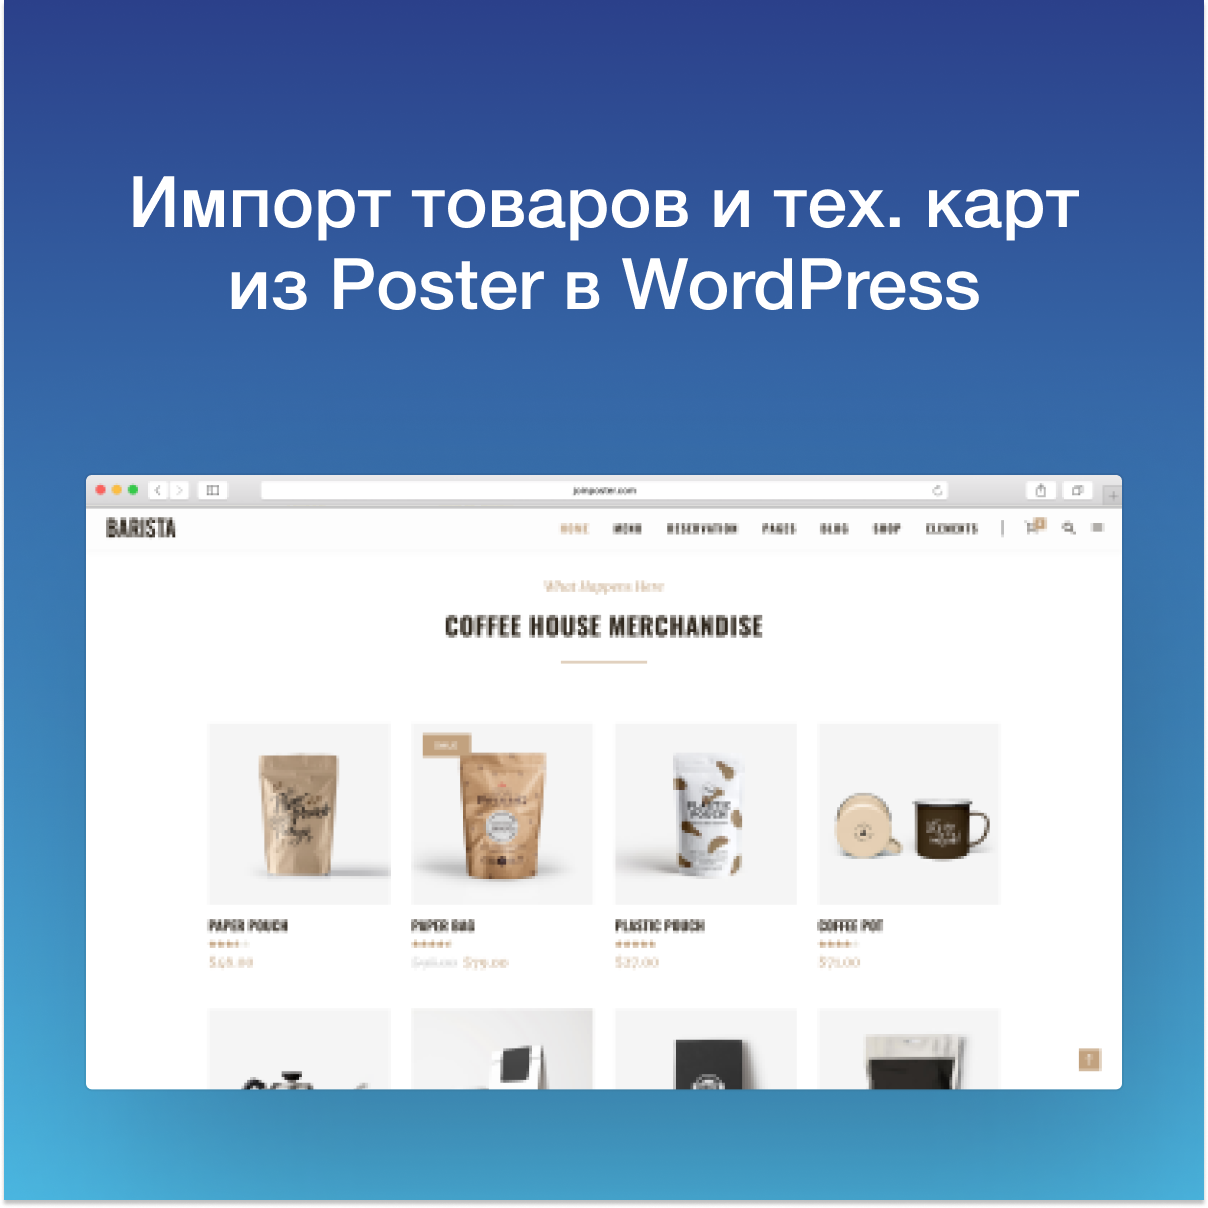 Integration with an online store on WordPress